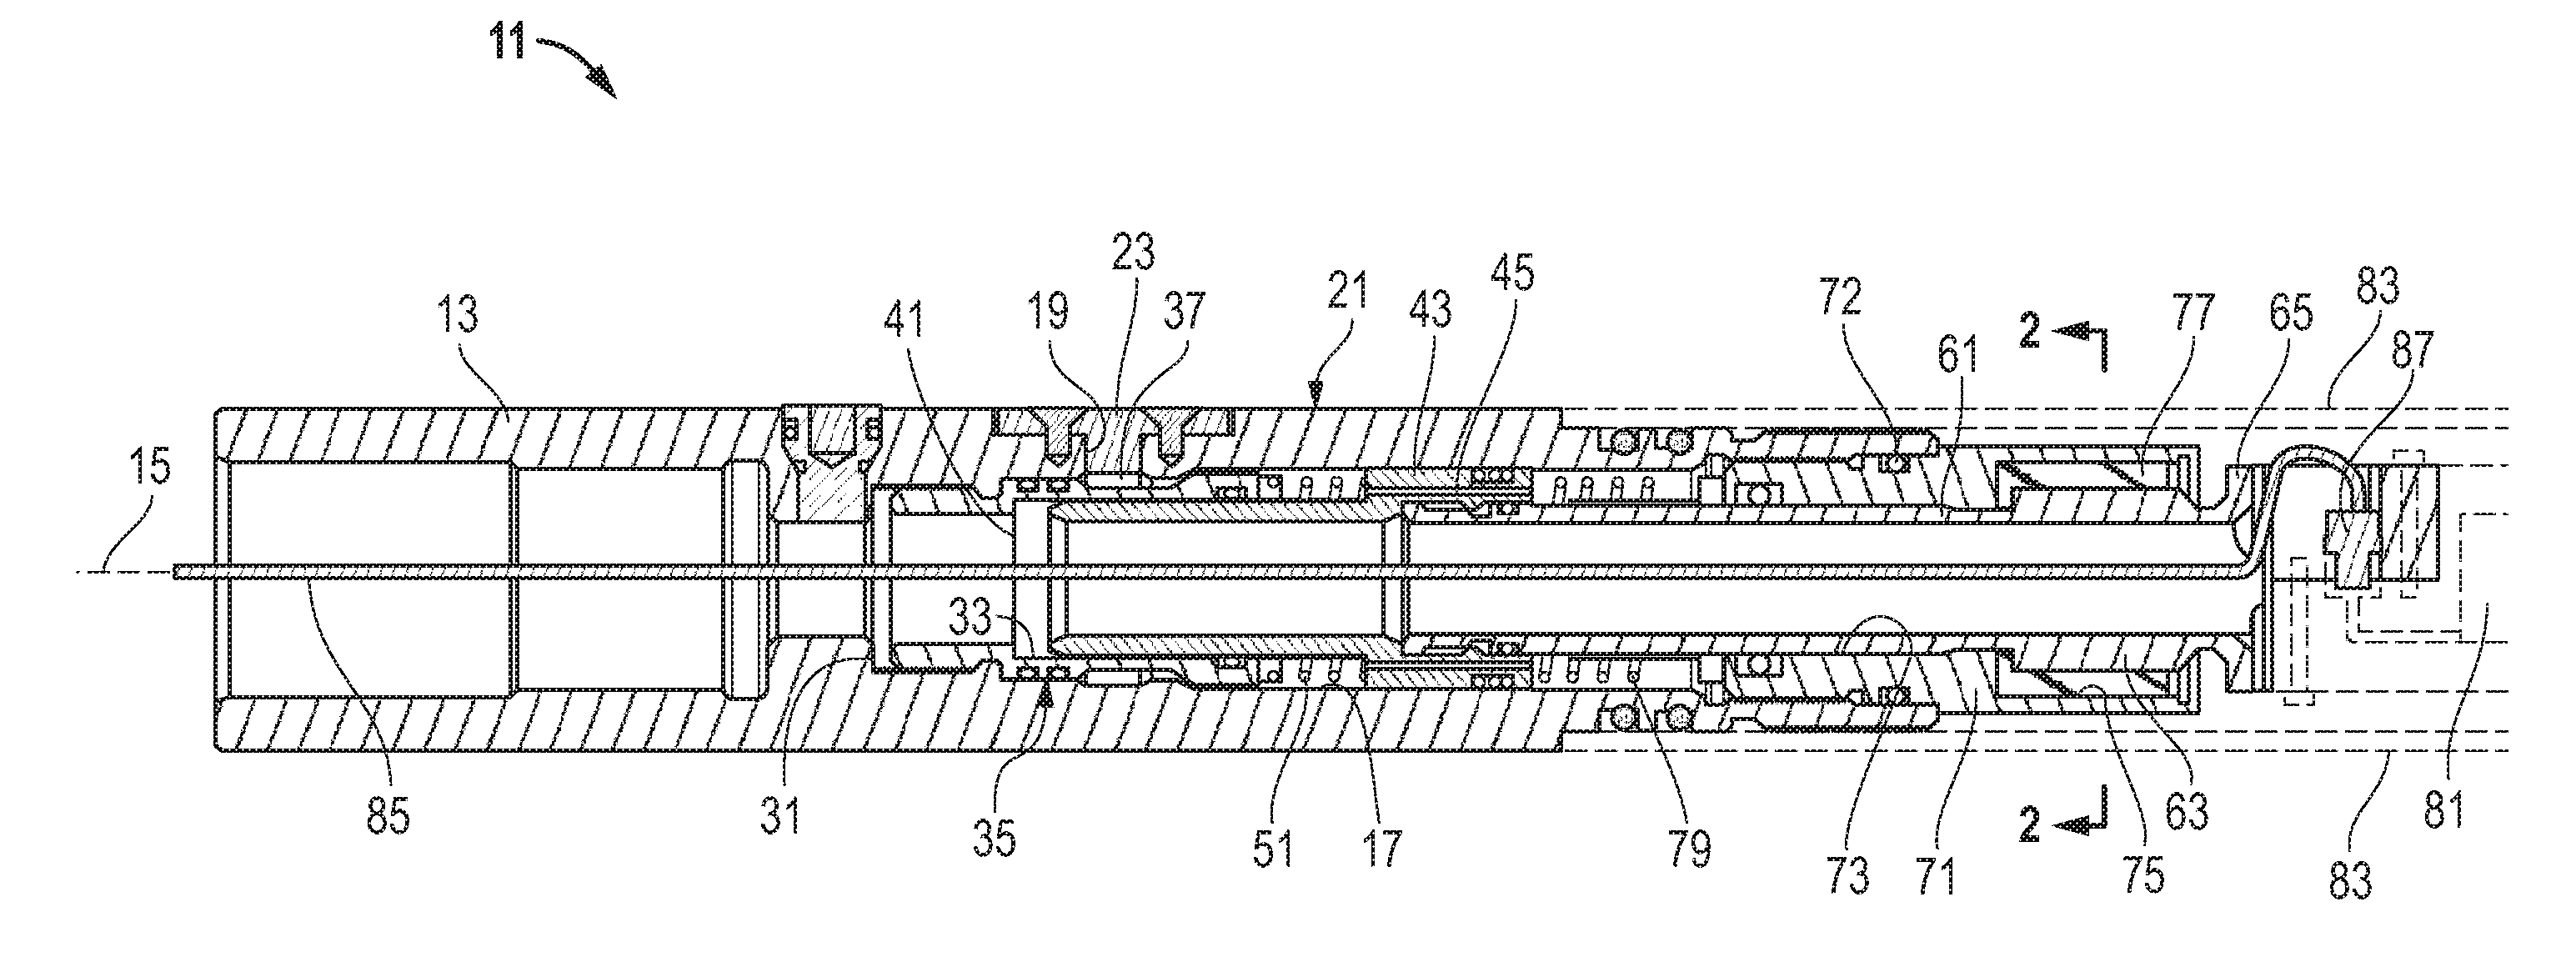 System, method and apparatus for protecting downhole components from shock and vibration